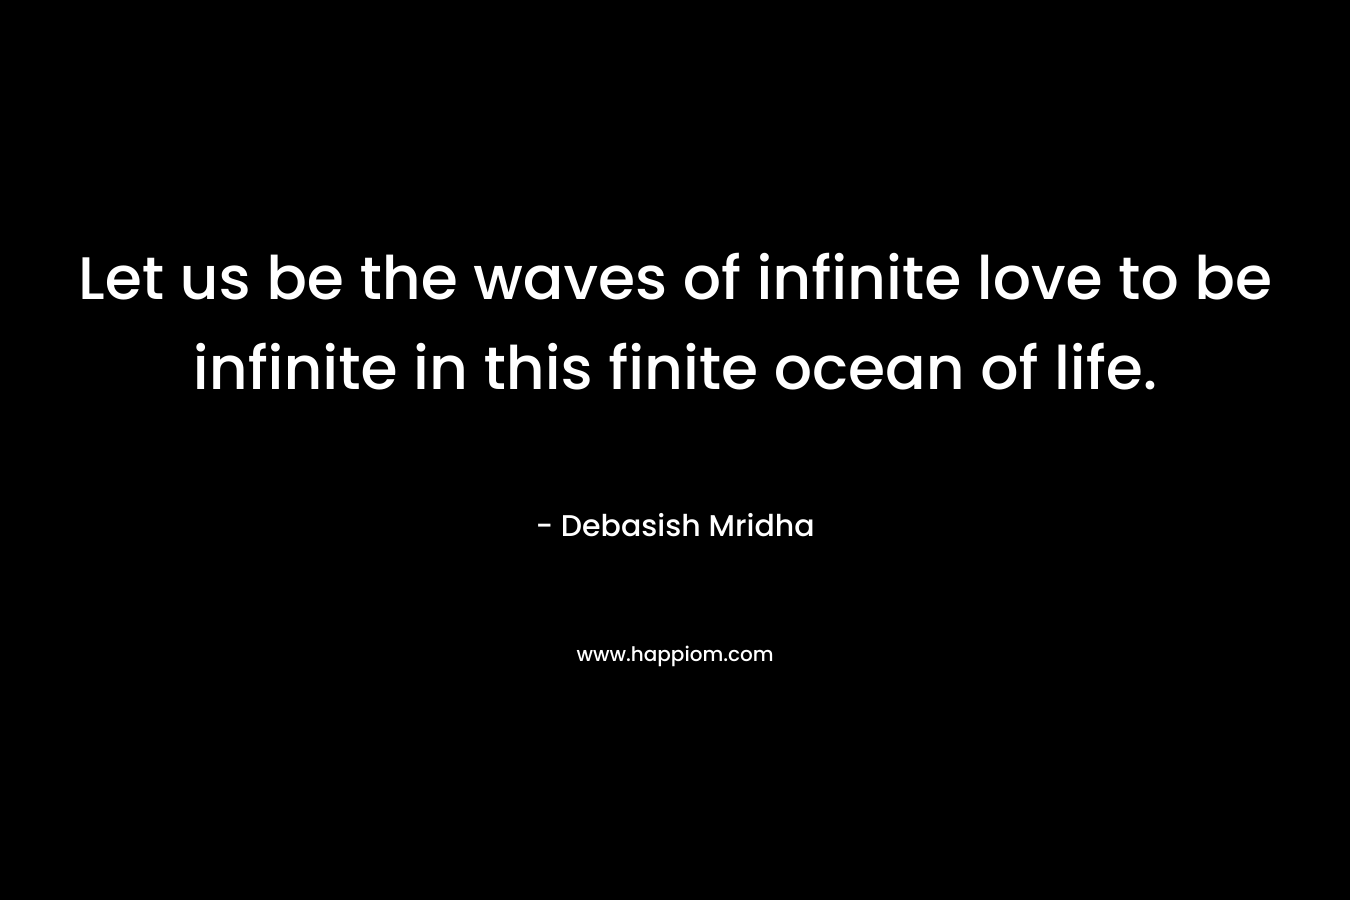 Let us be the waves of infinite love to be infinite in this finite ocean of life.